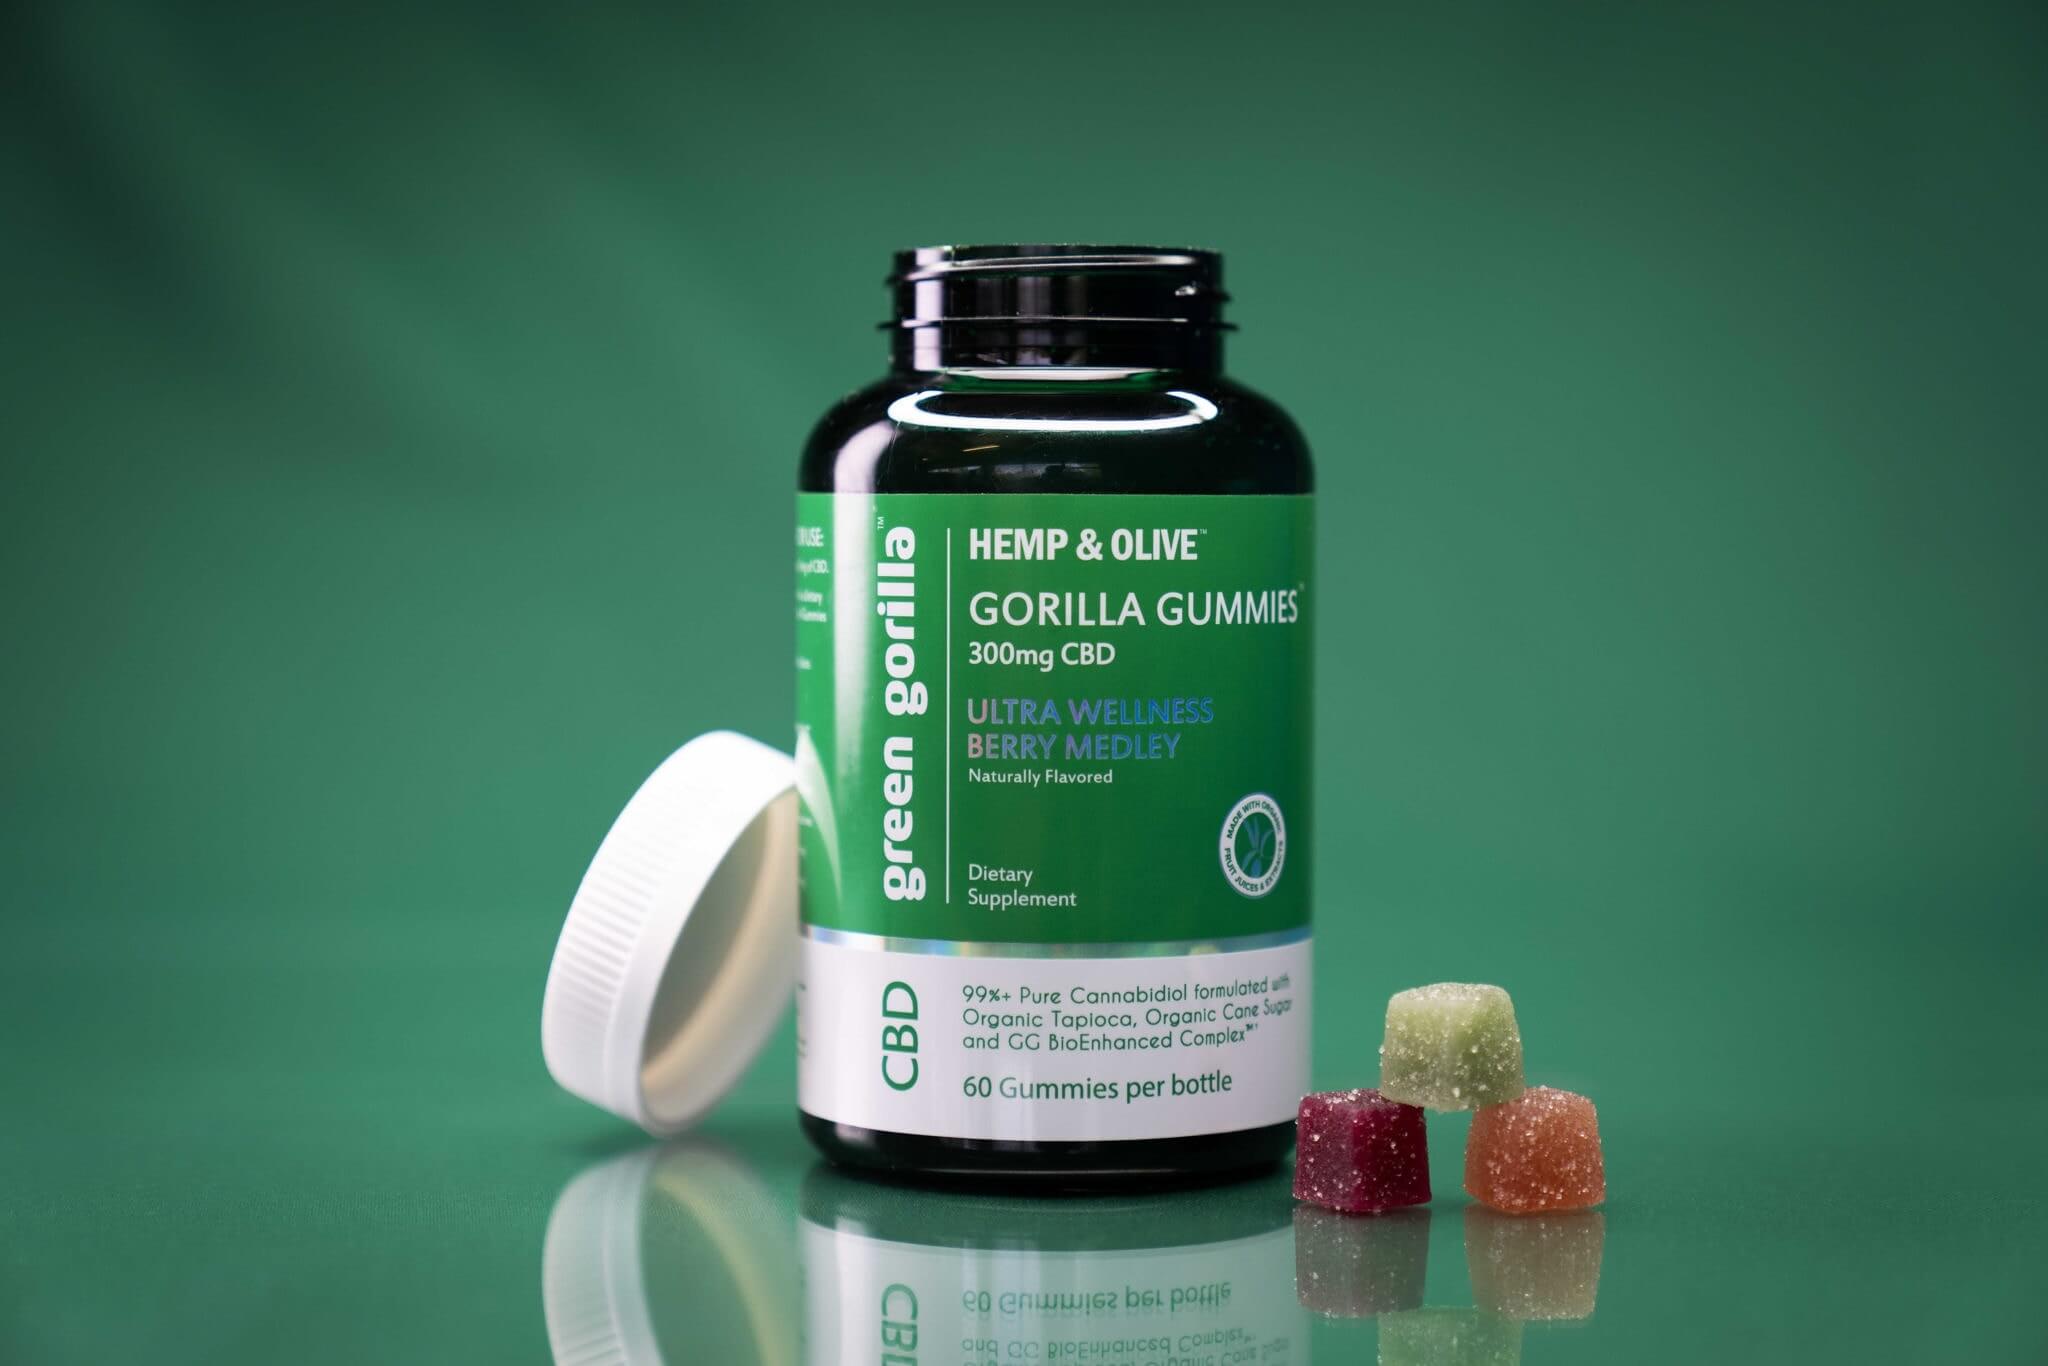 Edibles Magazine Features Product Review for Gorilla Gummies